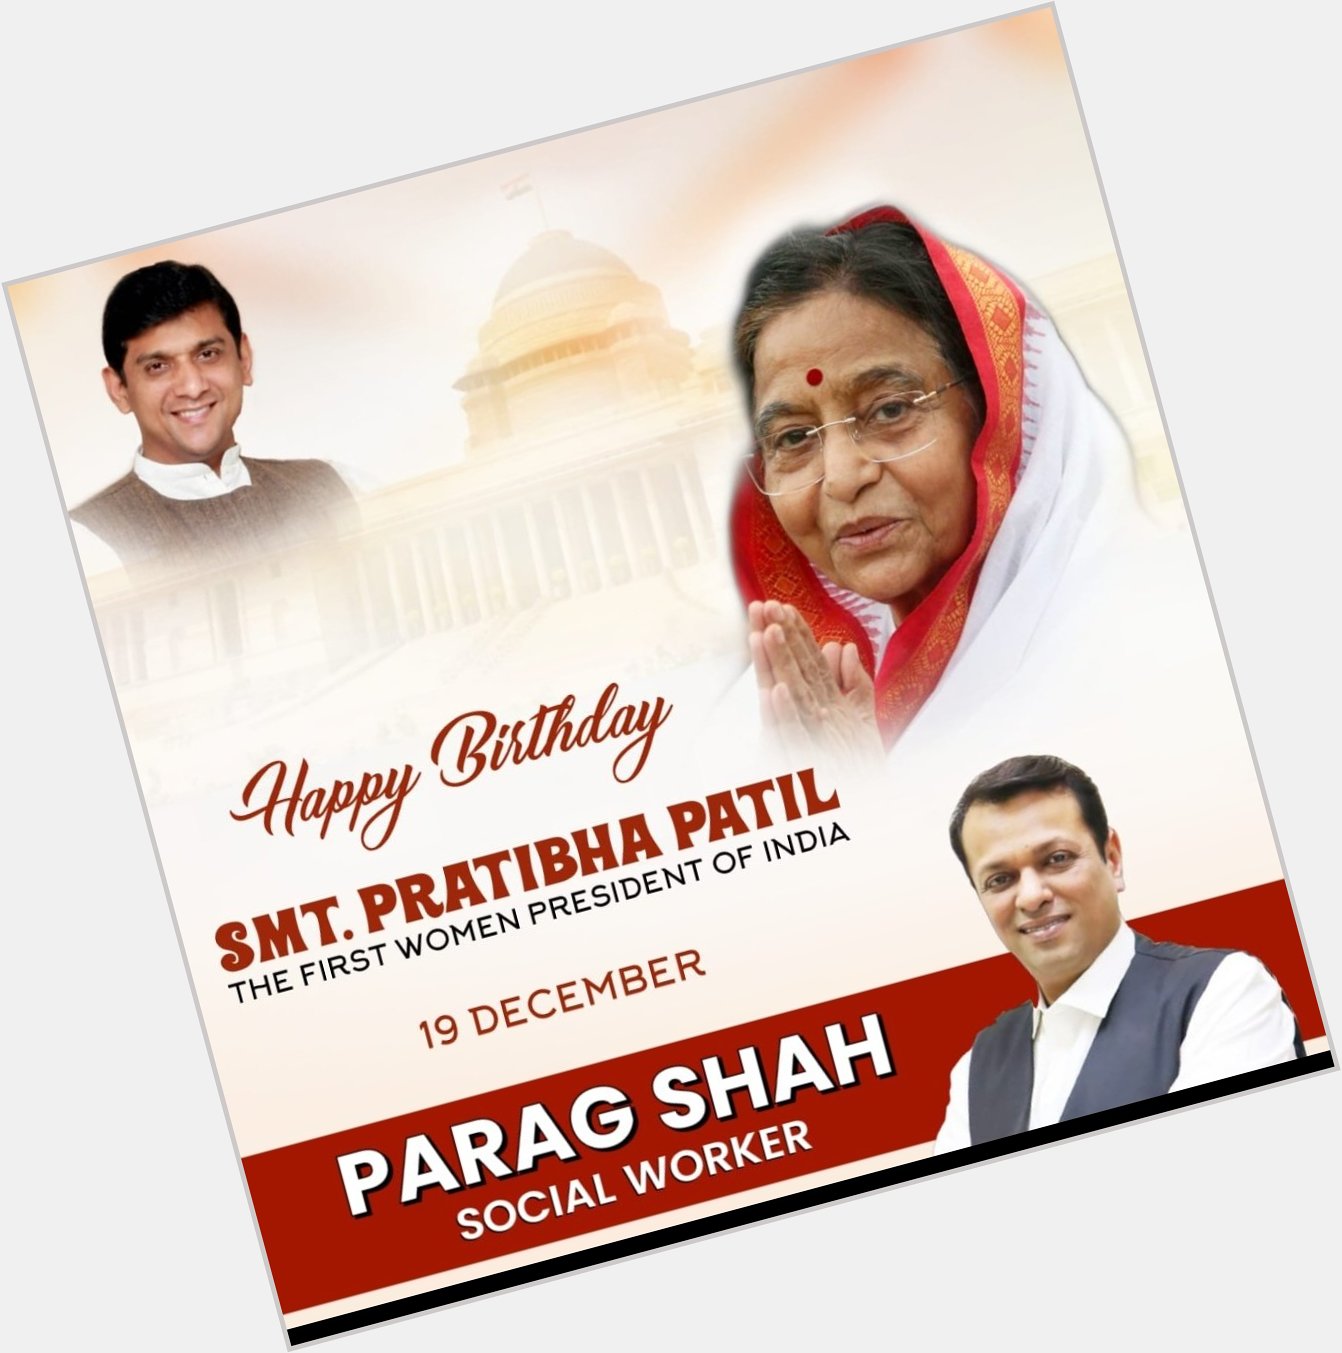 Wishing a very happy birthday to the first women President of India Smt. Pratibha Patil. 